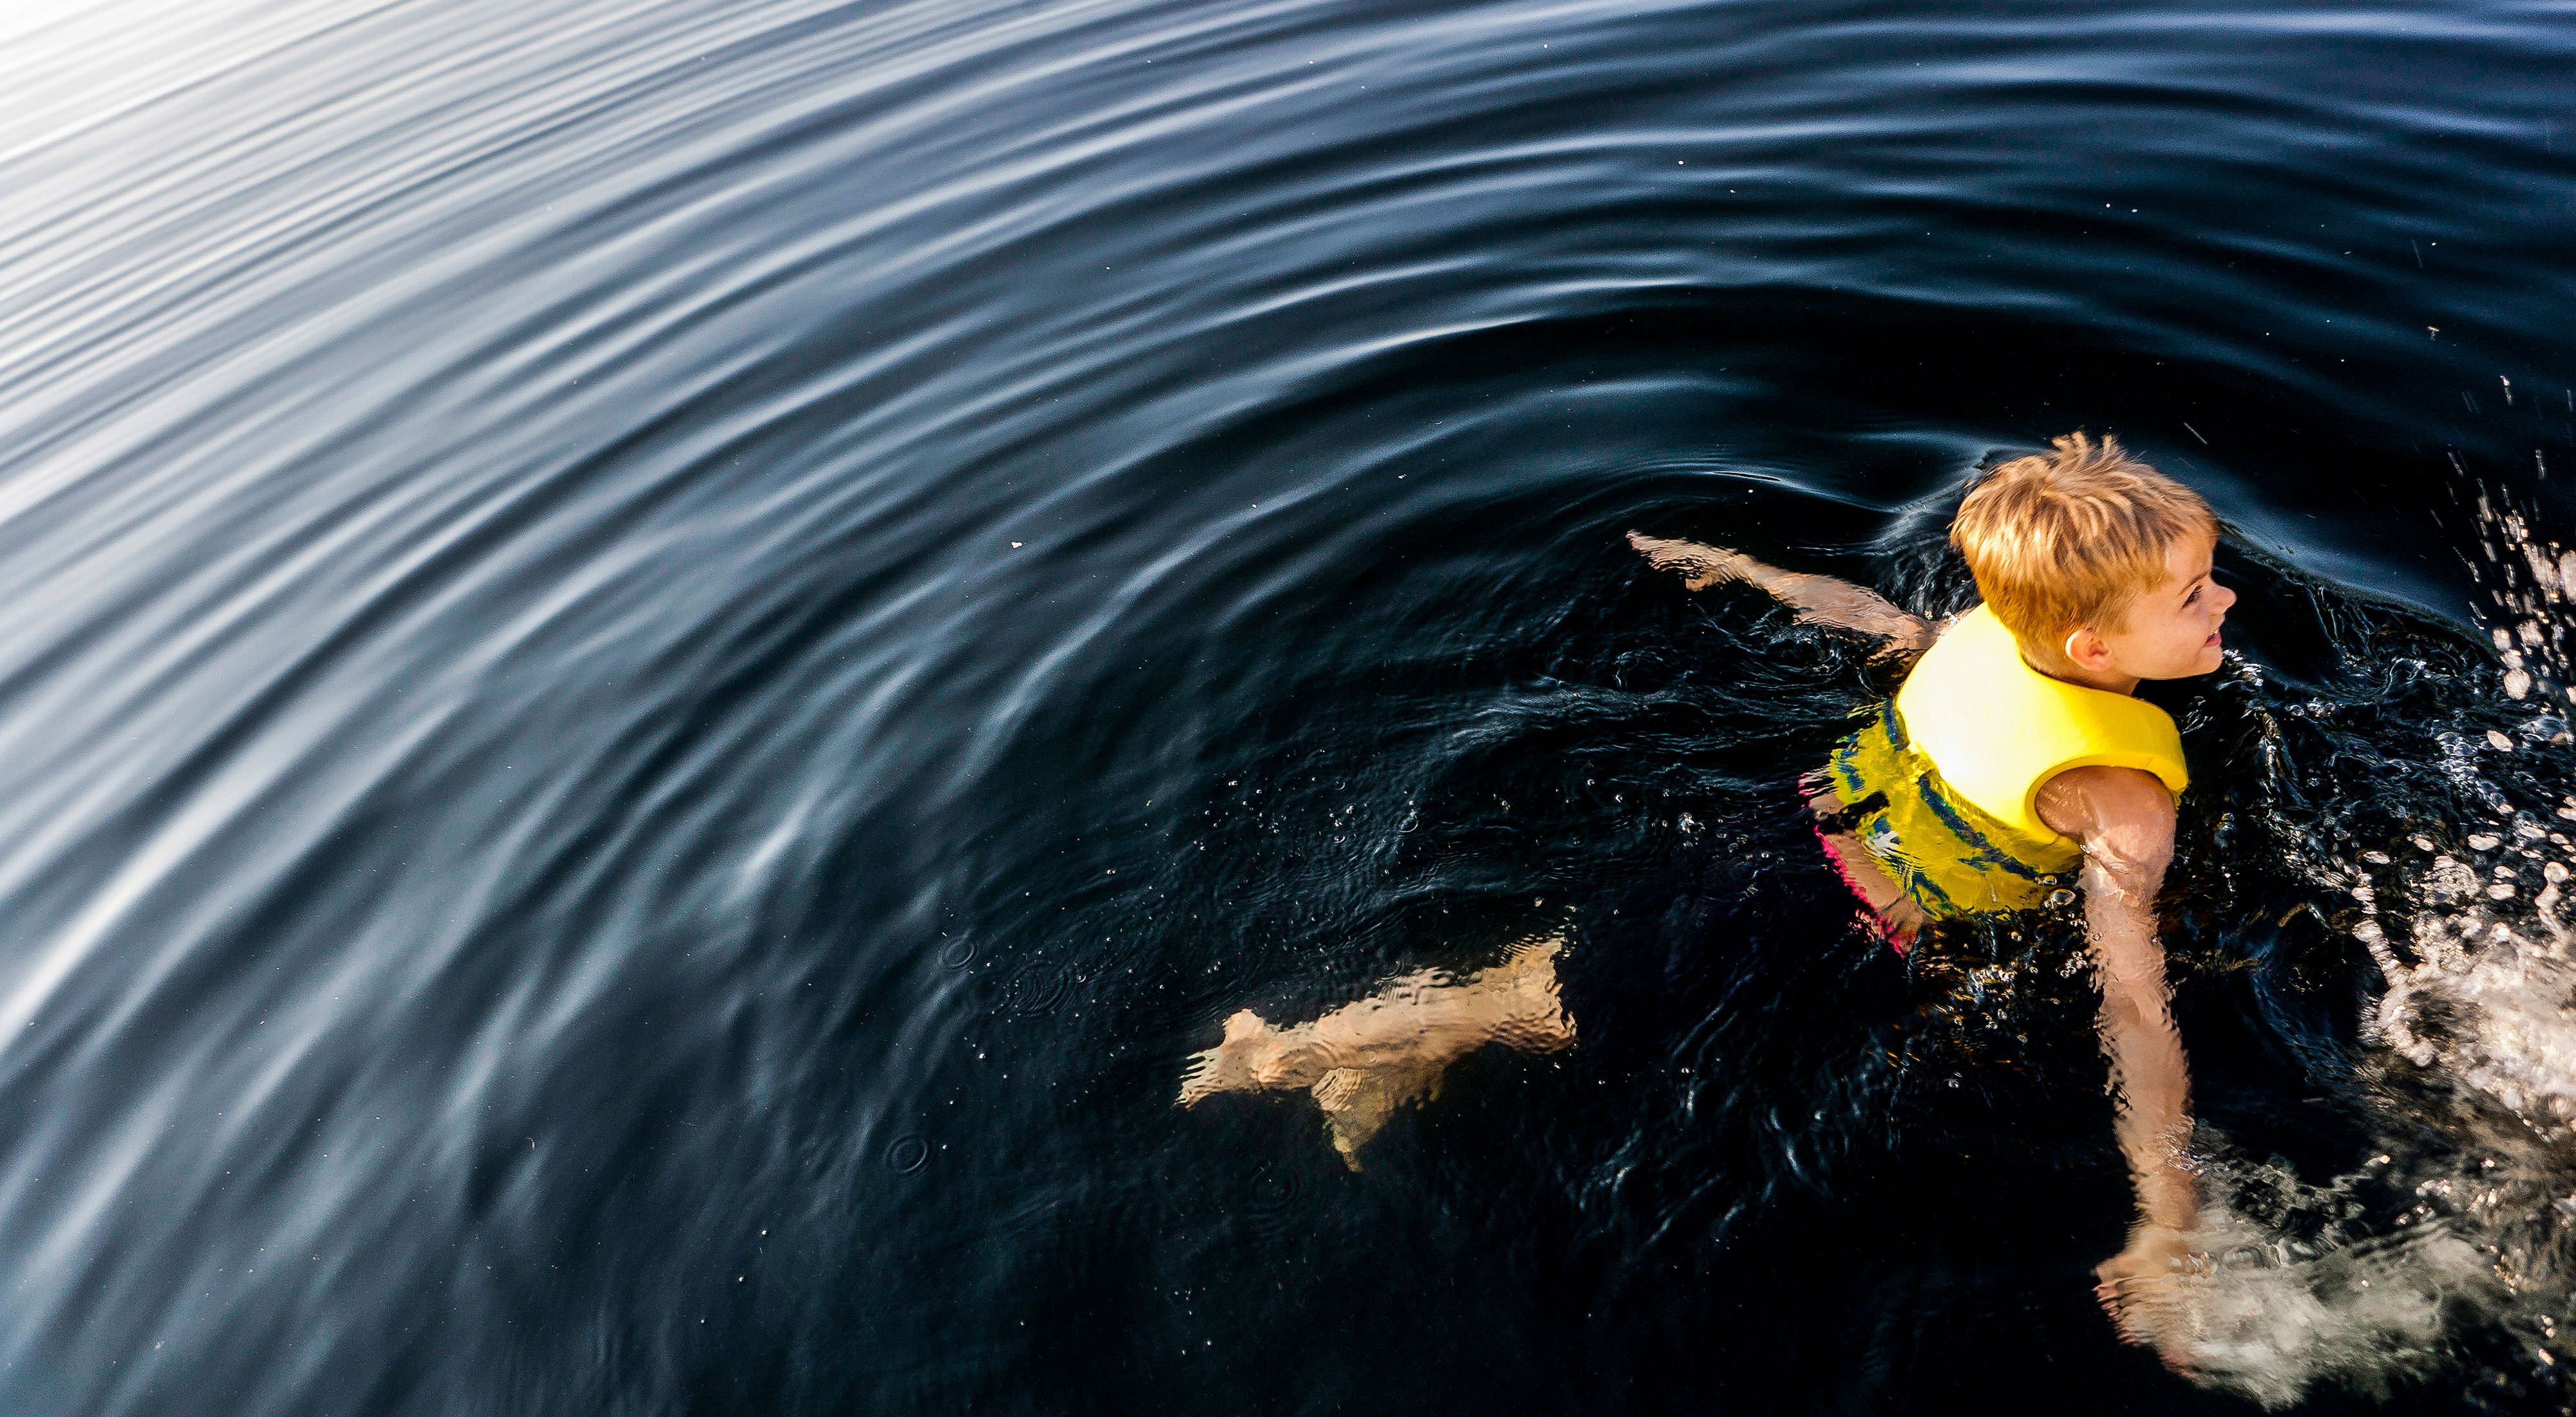 A boy swims in calm, dark blue waters with a yellow life jacket.